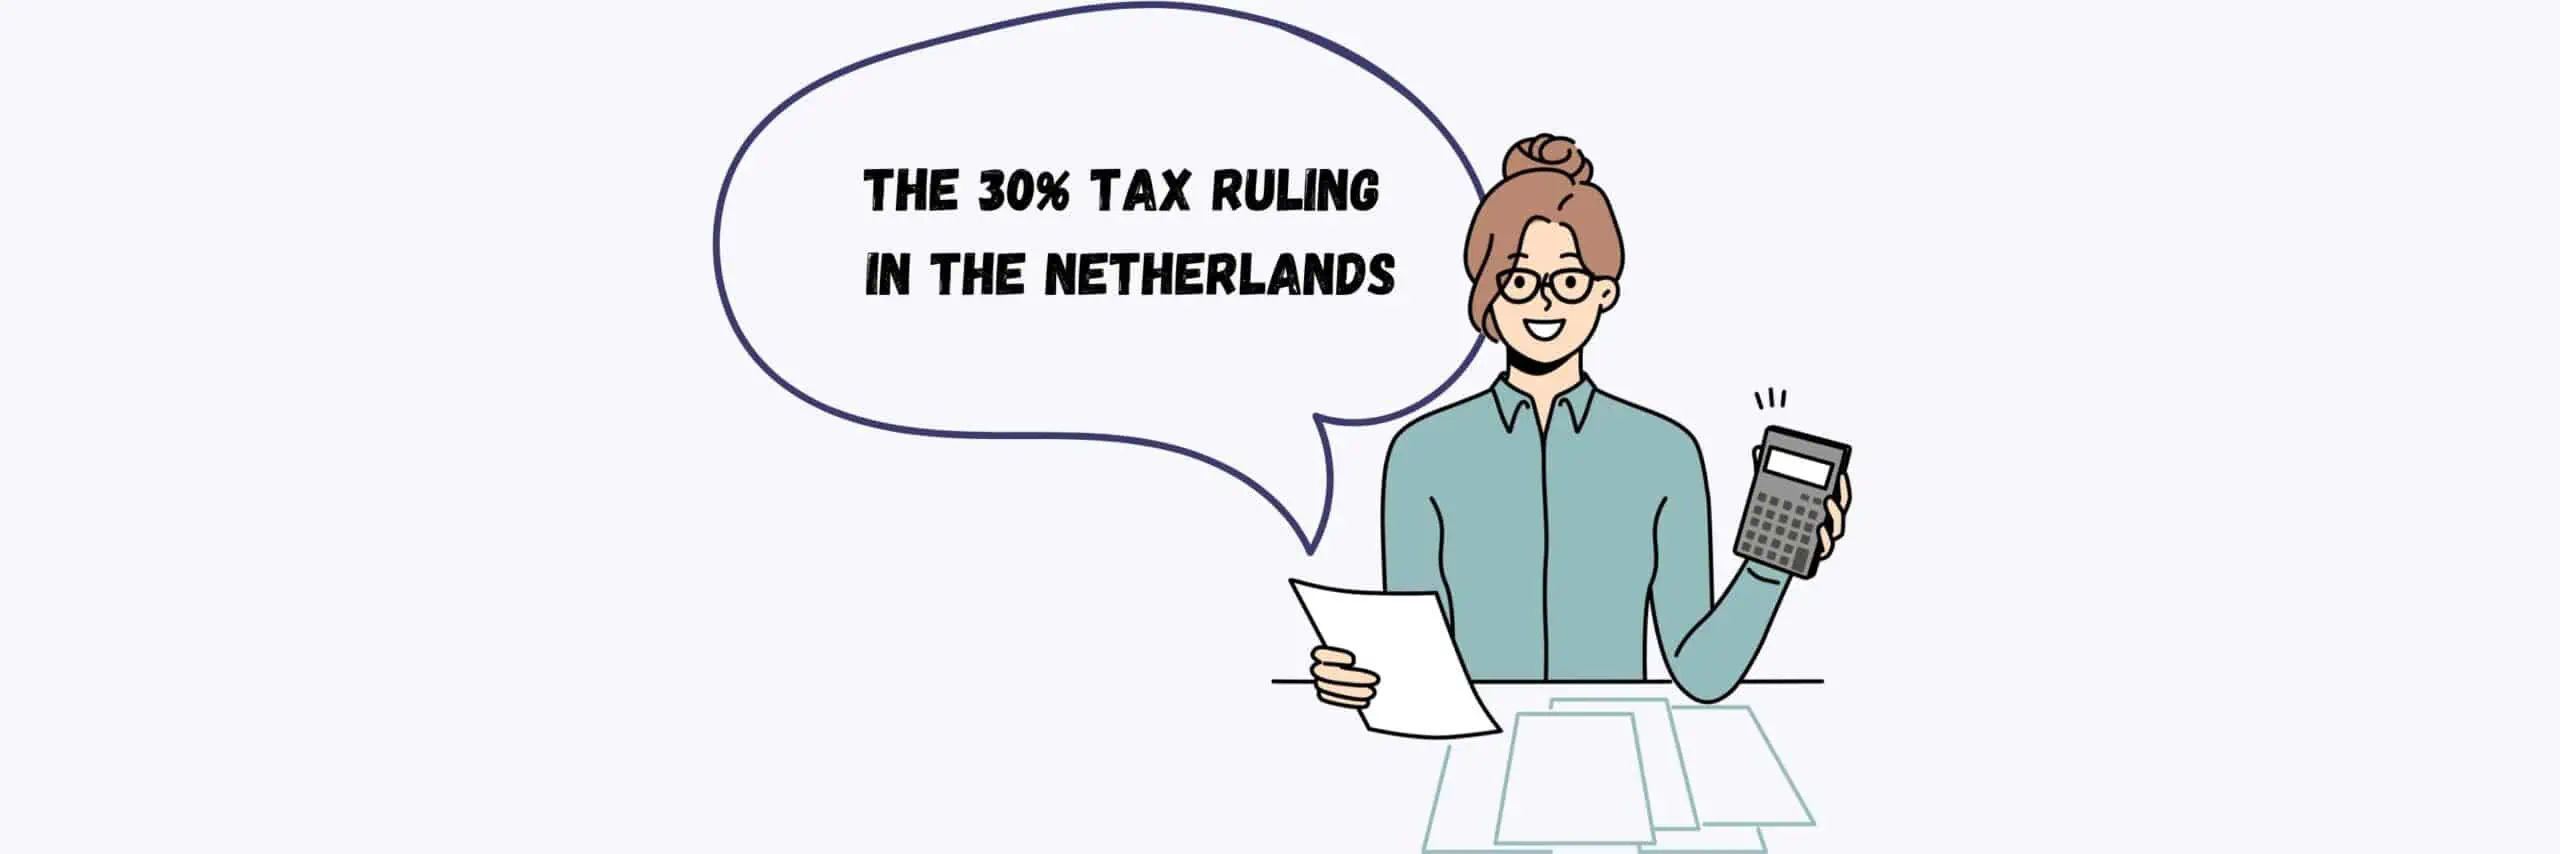 The 30% Tax Ruling In The Netherlands